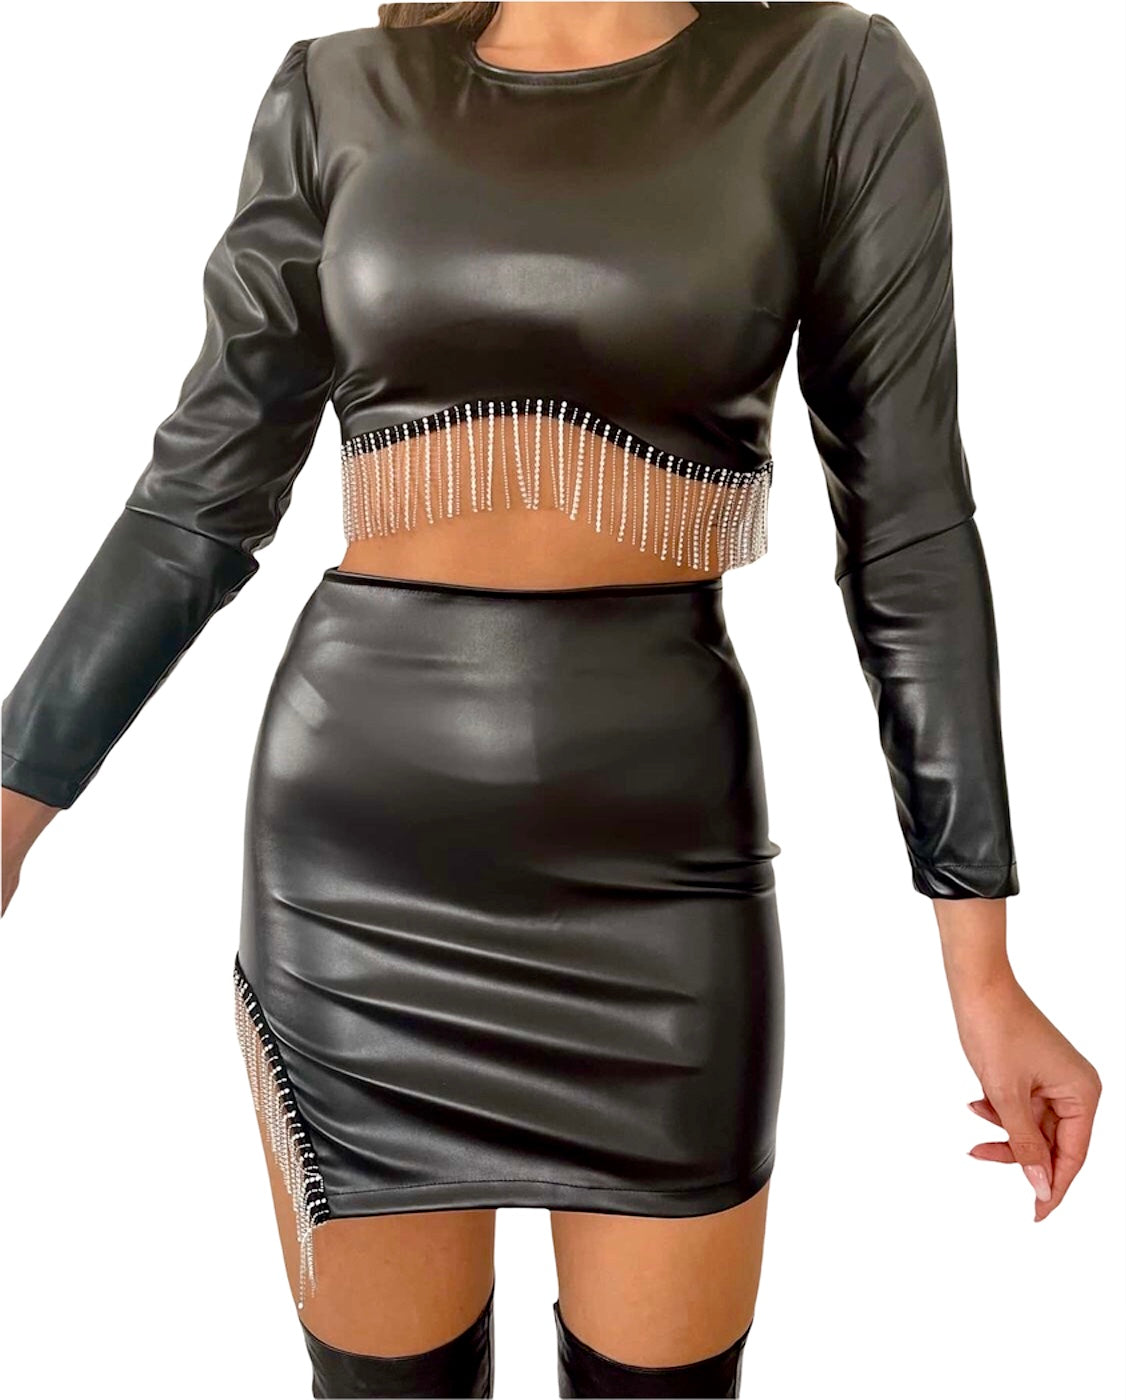 Black Leather Long Sleeve Crop Top and Mini Skirt Set with Crystal Fringes